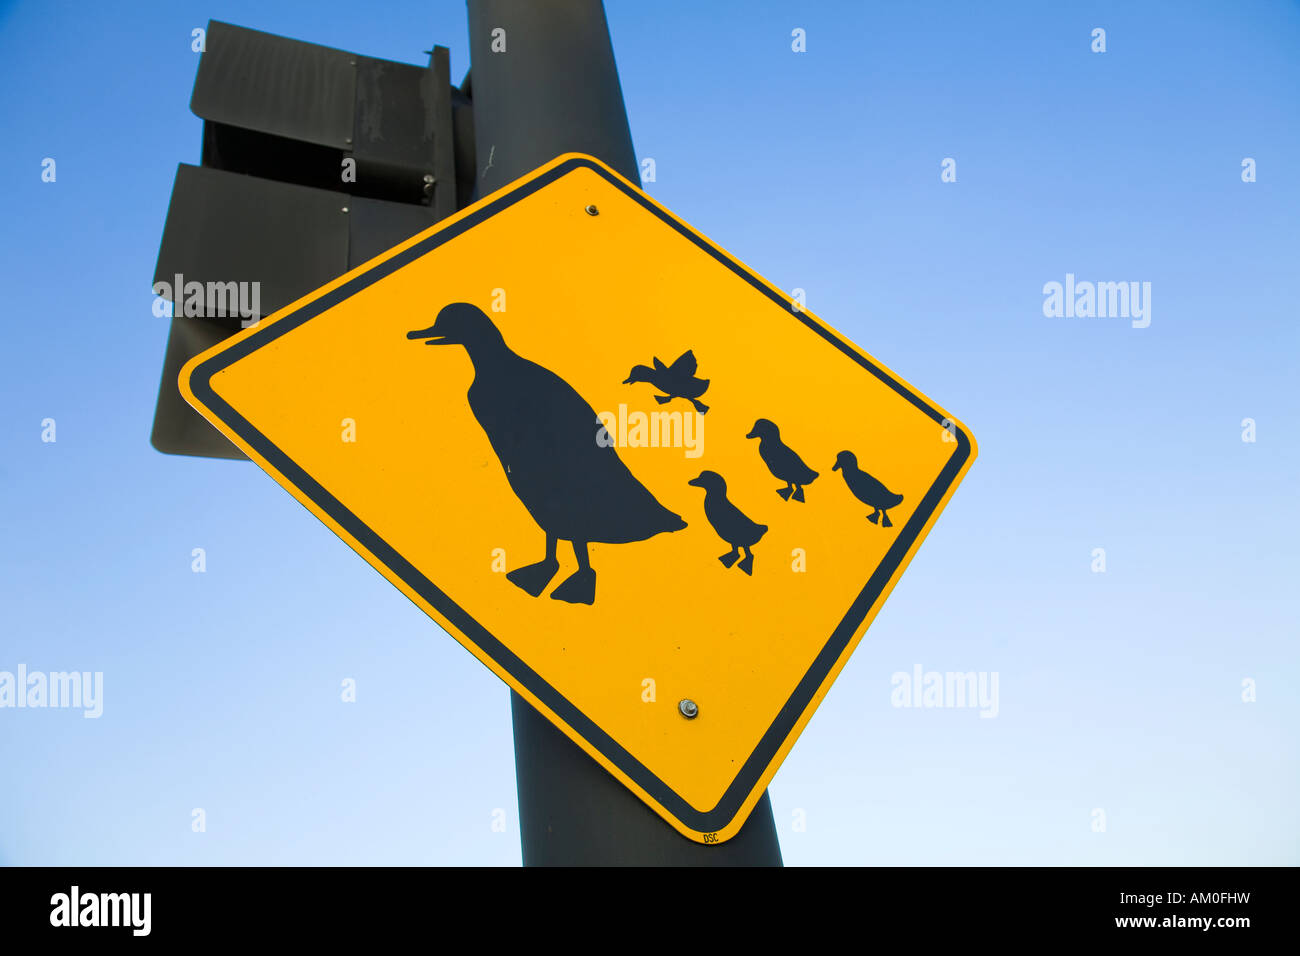 ILLINOIS Galena Duck crossing sign on traffic signal post yellow diamond with adult duck and ducklings Stock Photo